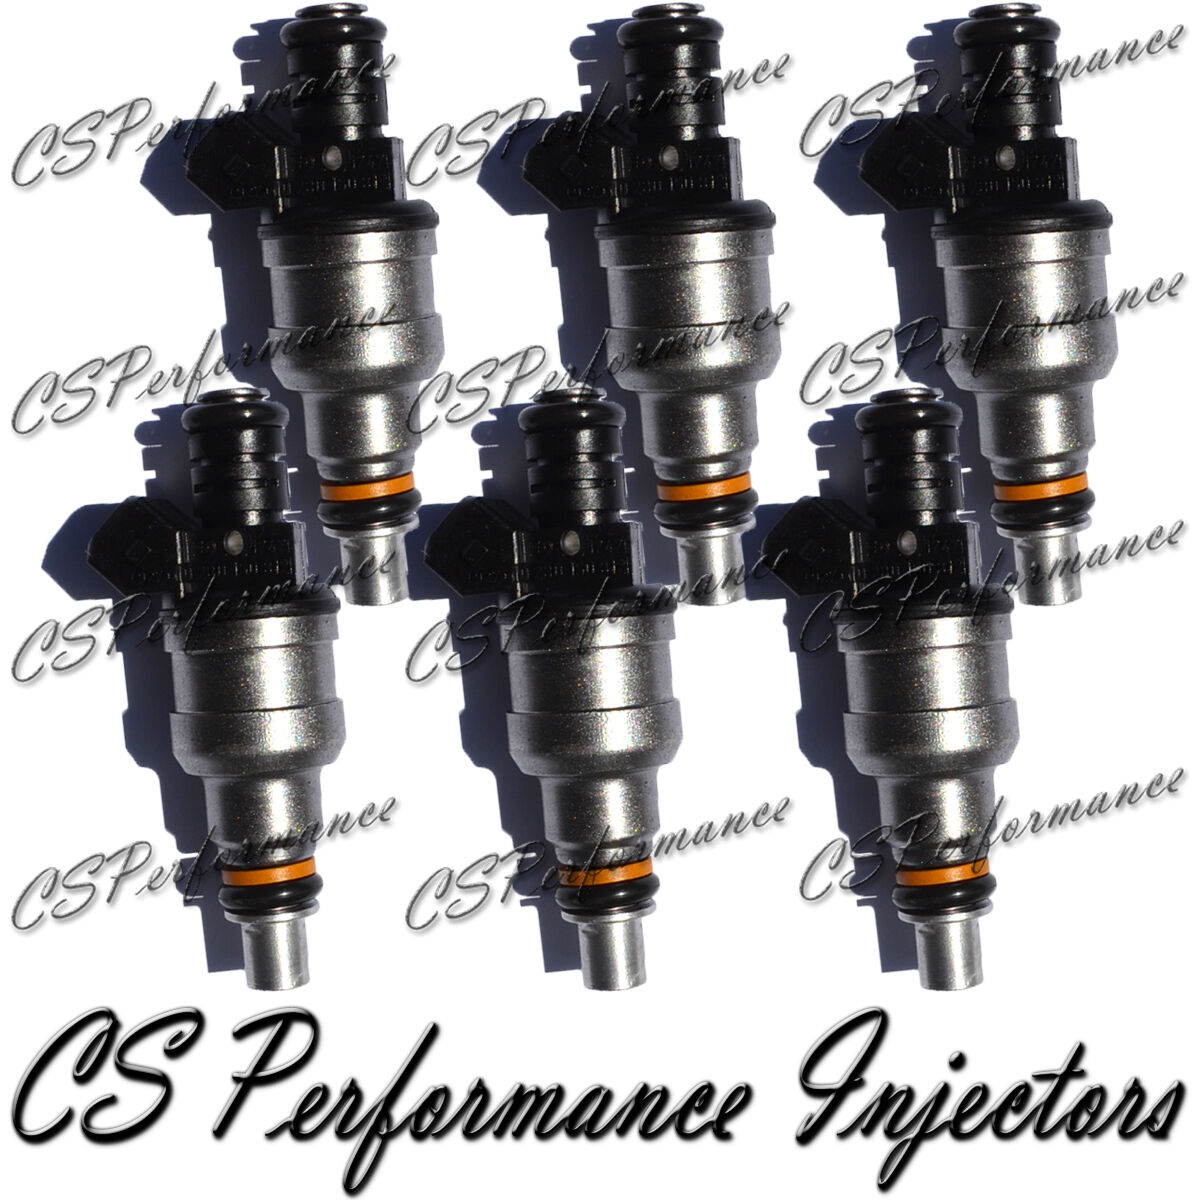 OEM Bosch Fuel Injectors Set for 89-90 Plymouth Acclaim 3.0L V6 1989 1990 3.0